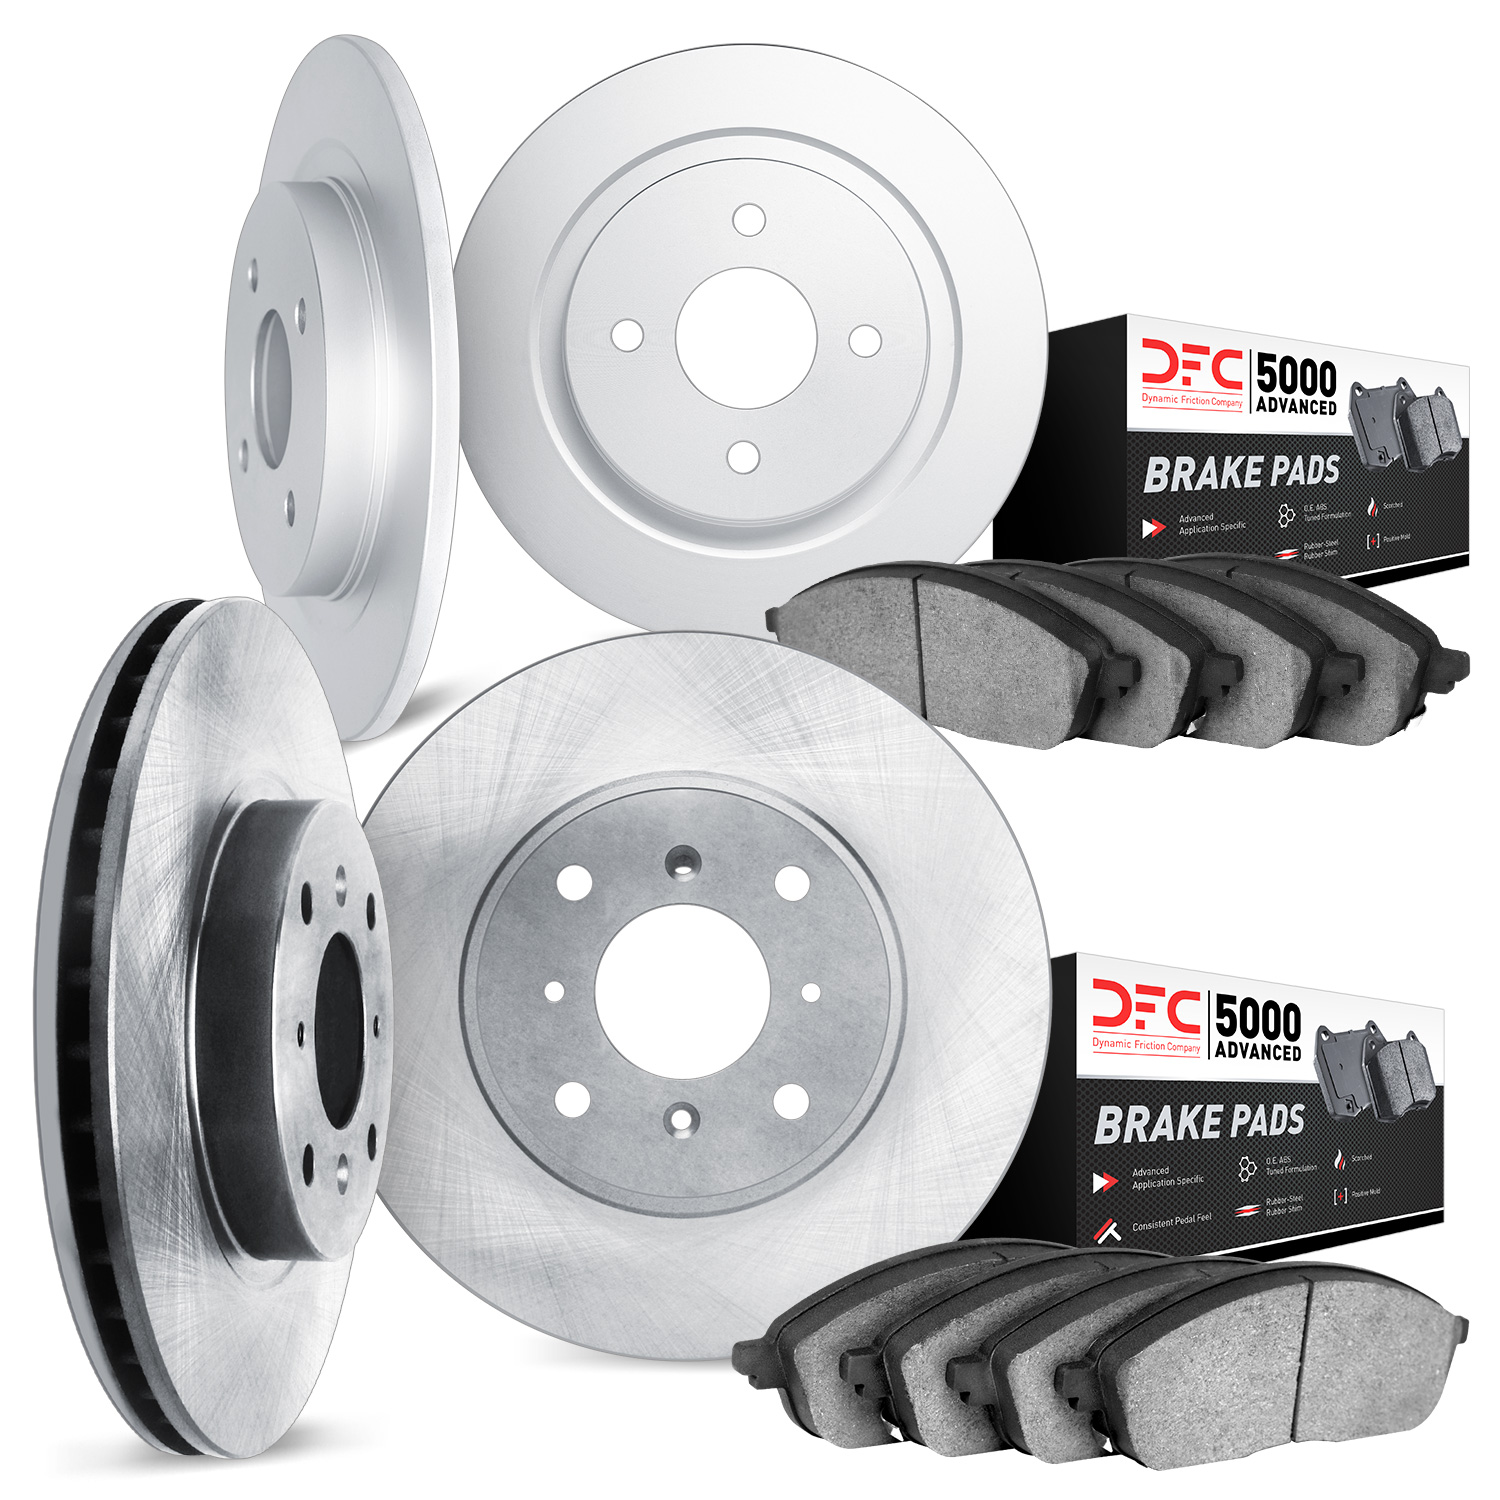 6504-18005 Brake Rotors w/5000 Advanced Brake Pads Kit, 2000-2002 GM, Position: Front and Rear